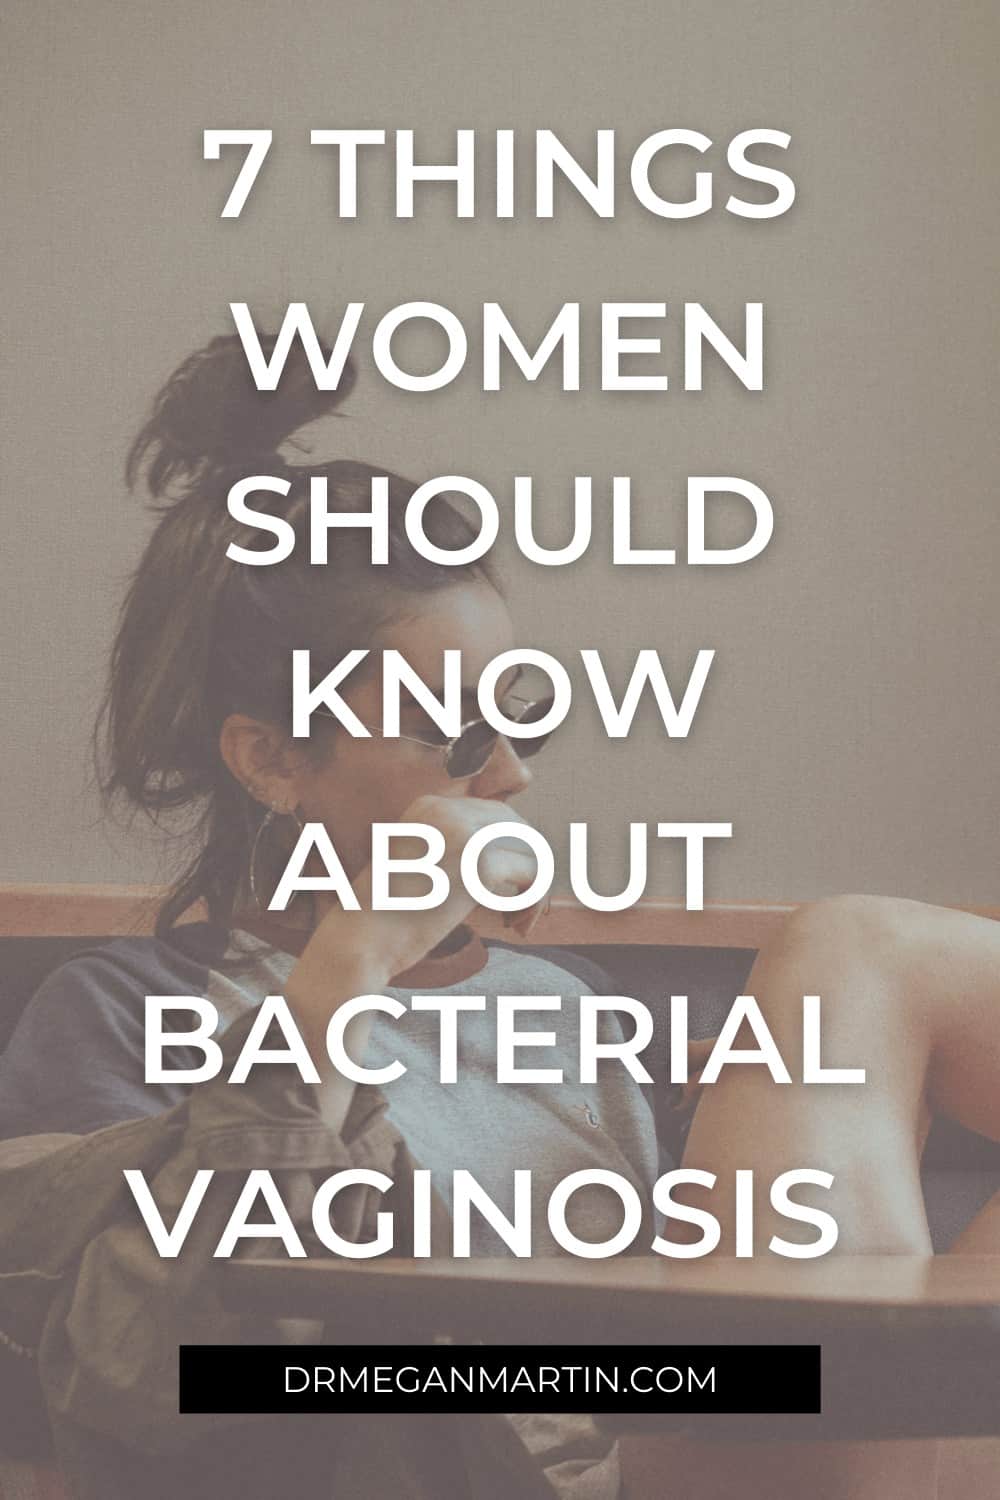 7 Things Women Should Know About Bacterial Vaginosis